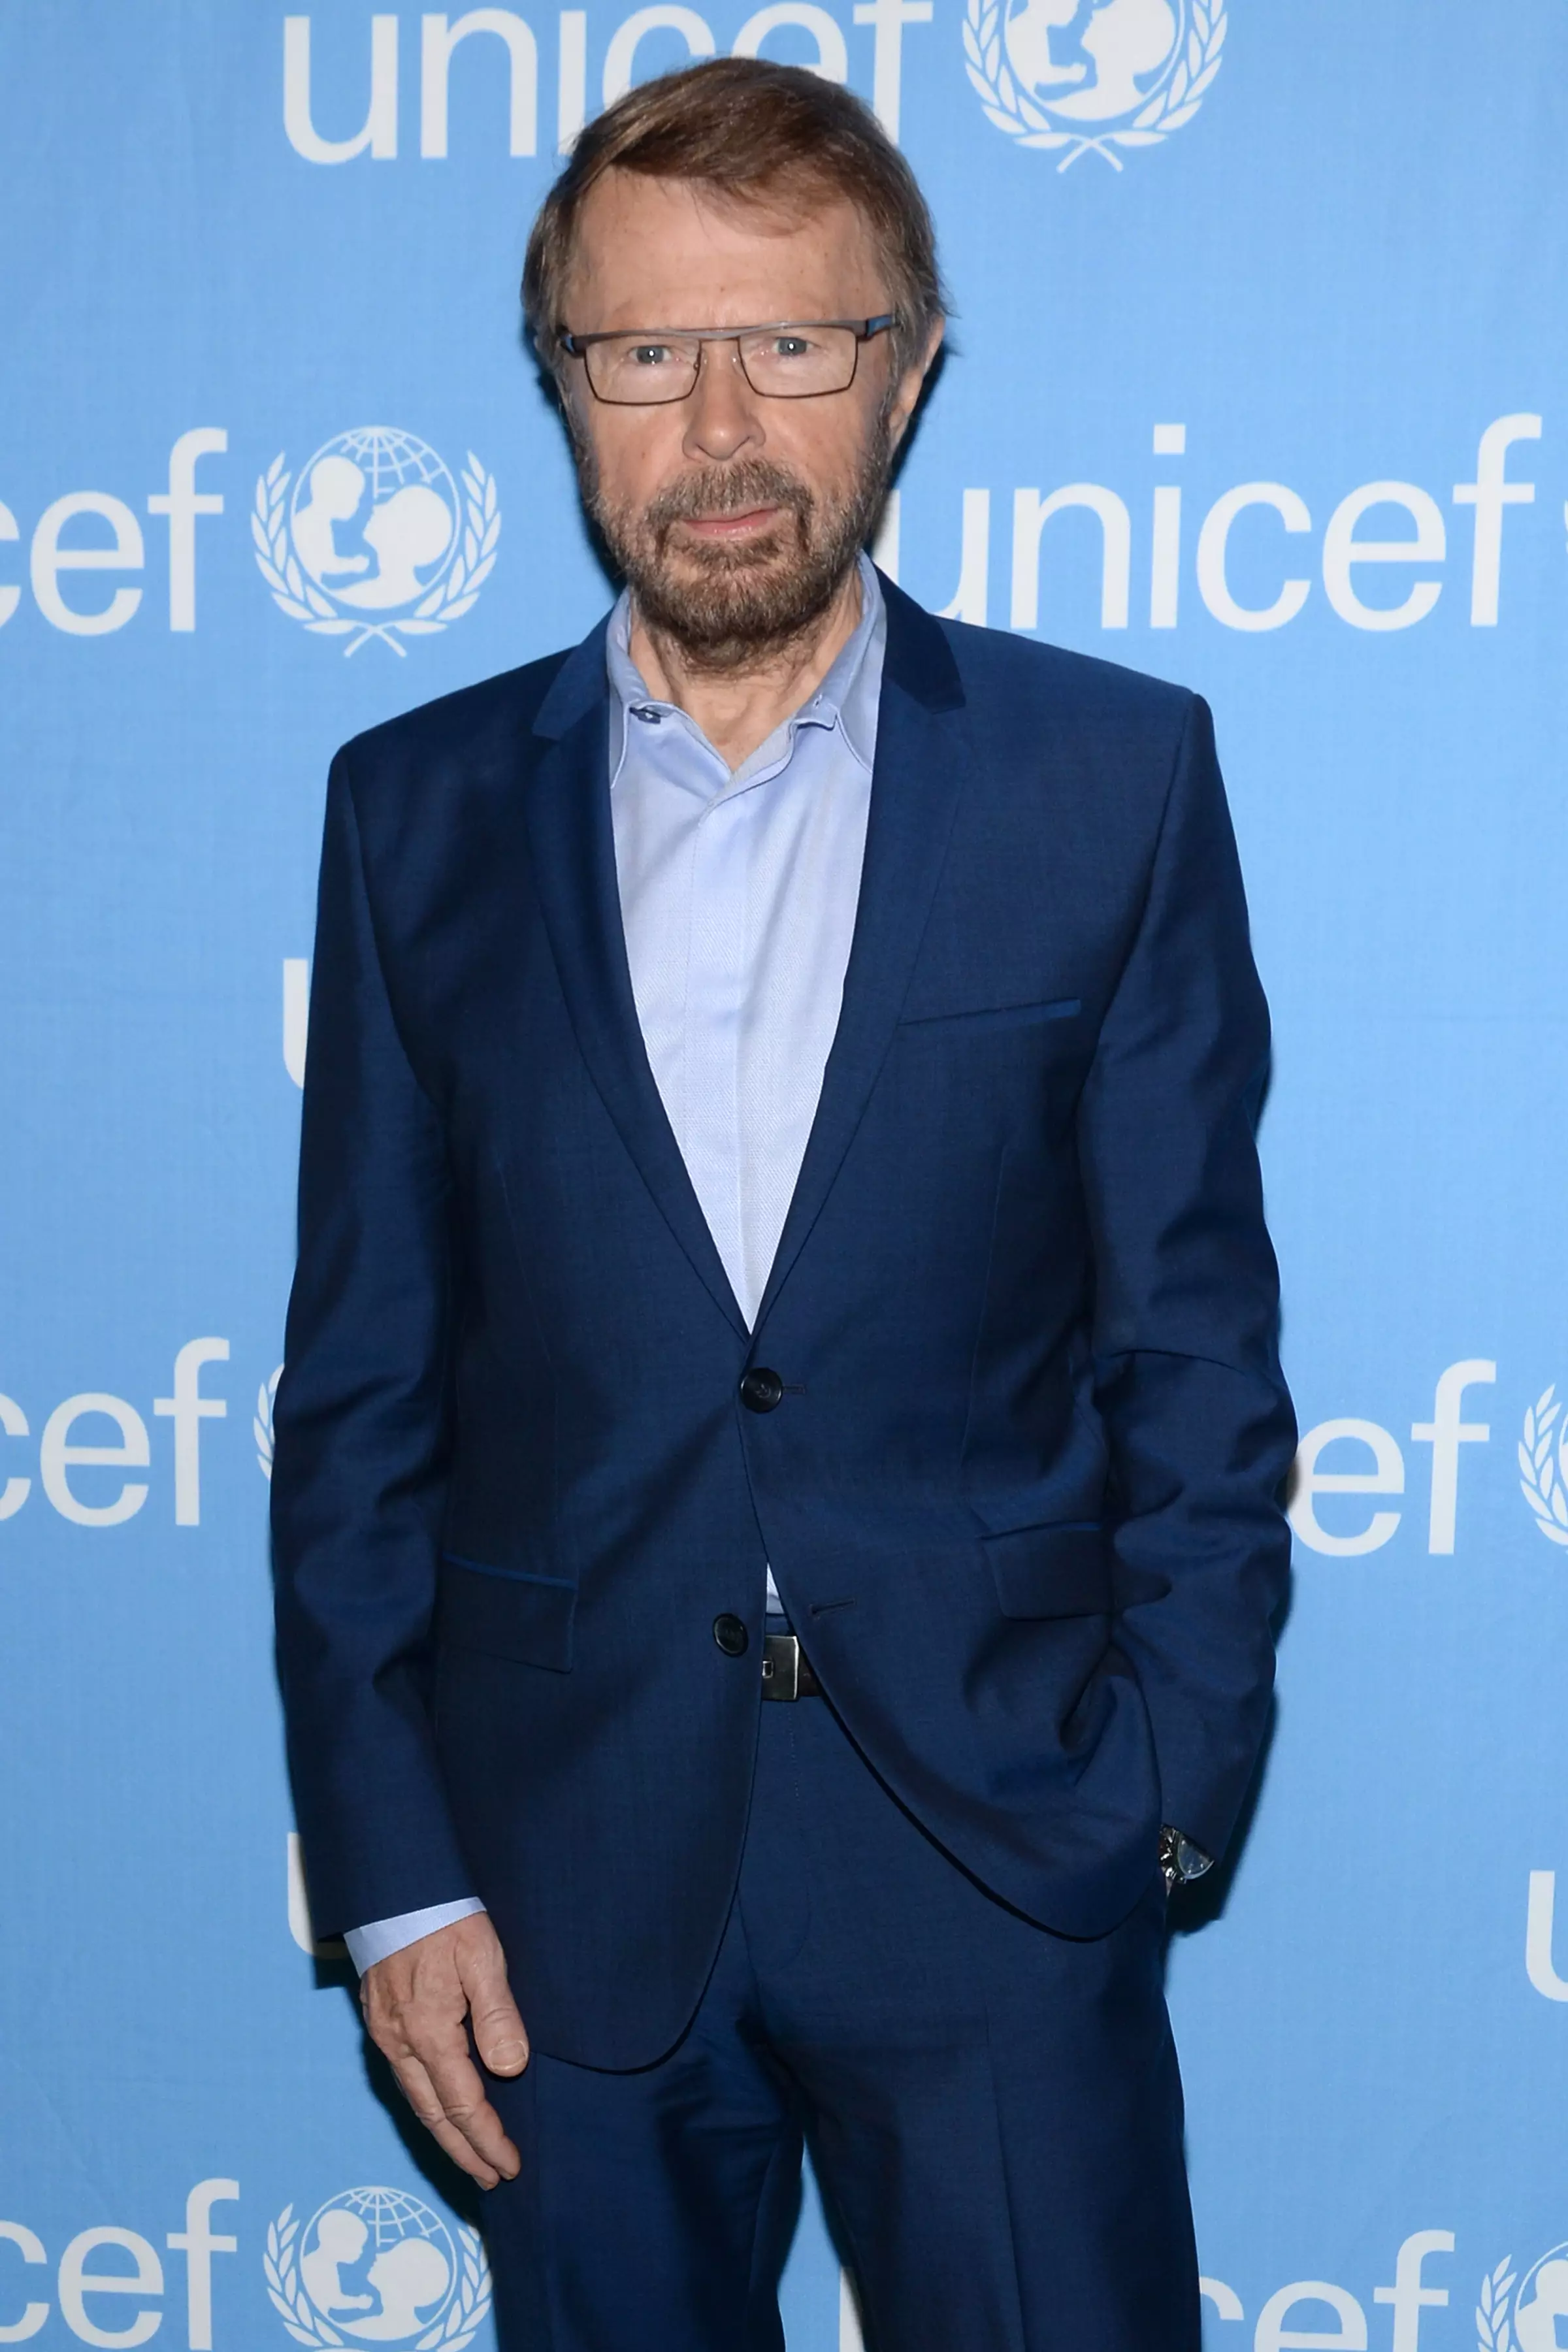 Björn Ulvaeus revealed that he still has sex four times a week.